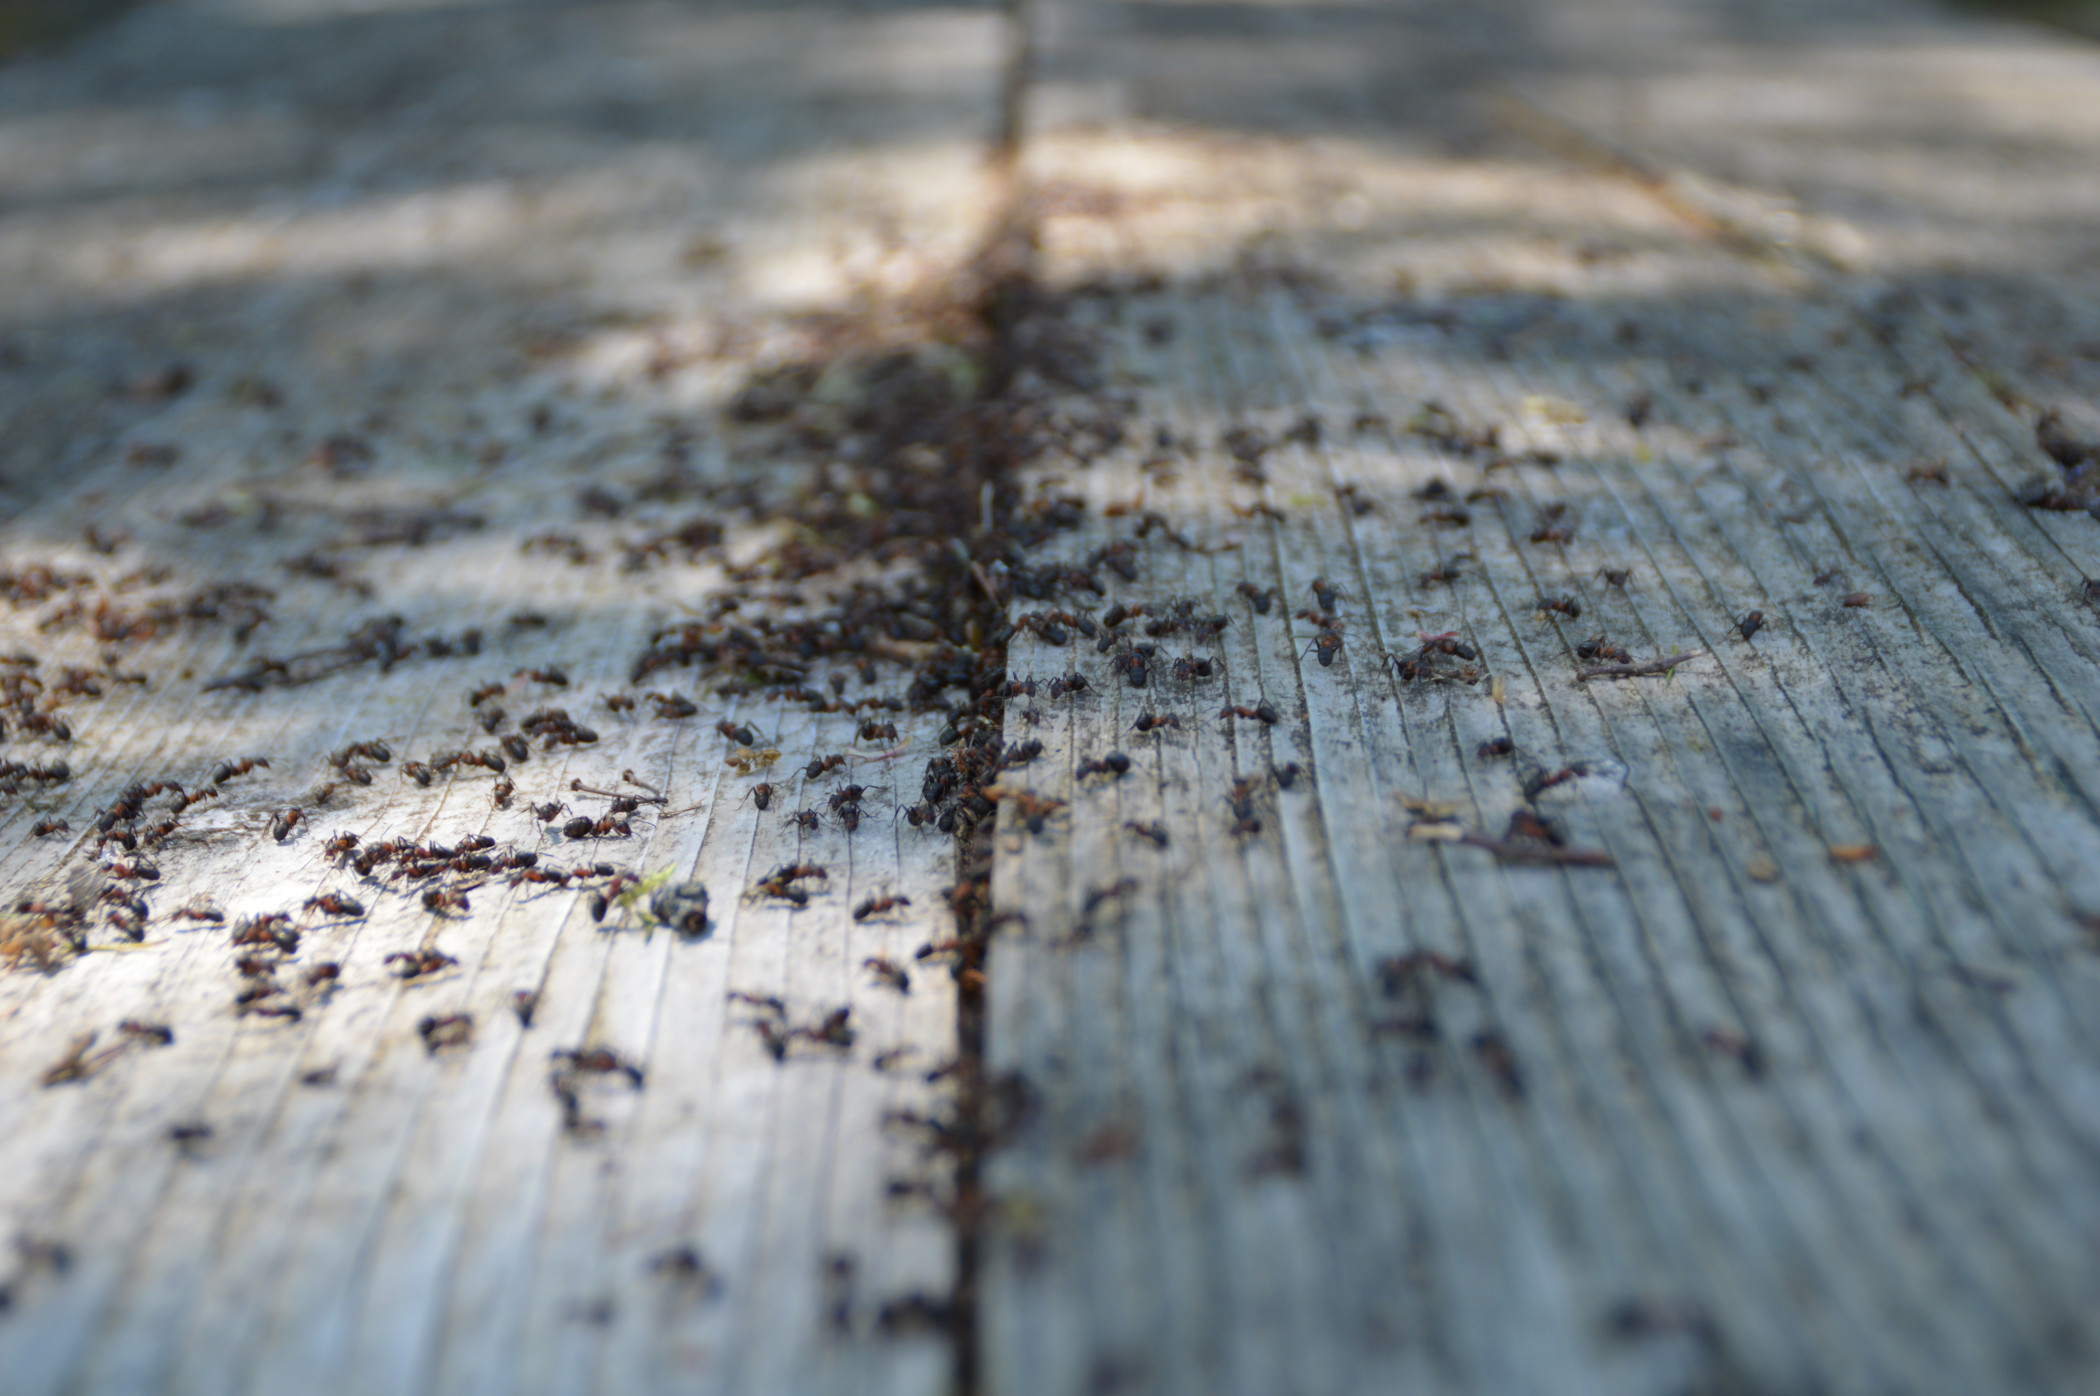 ants swarming on a wooden deck